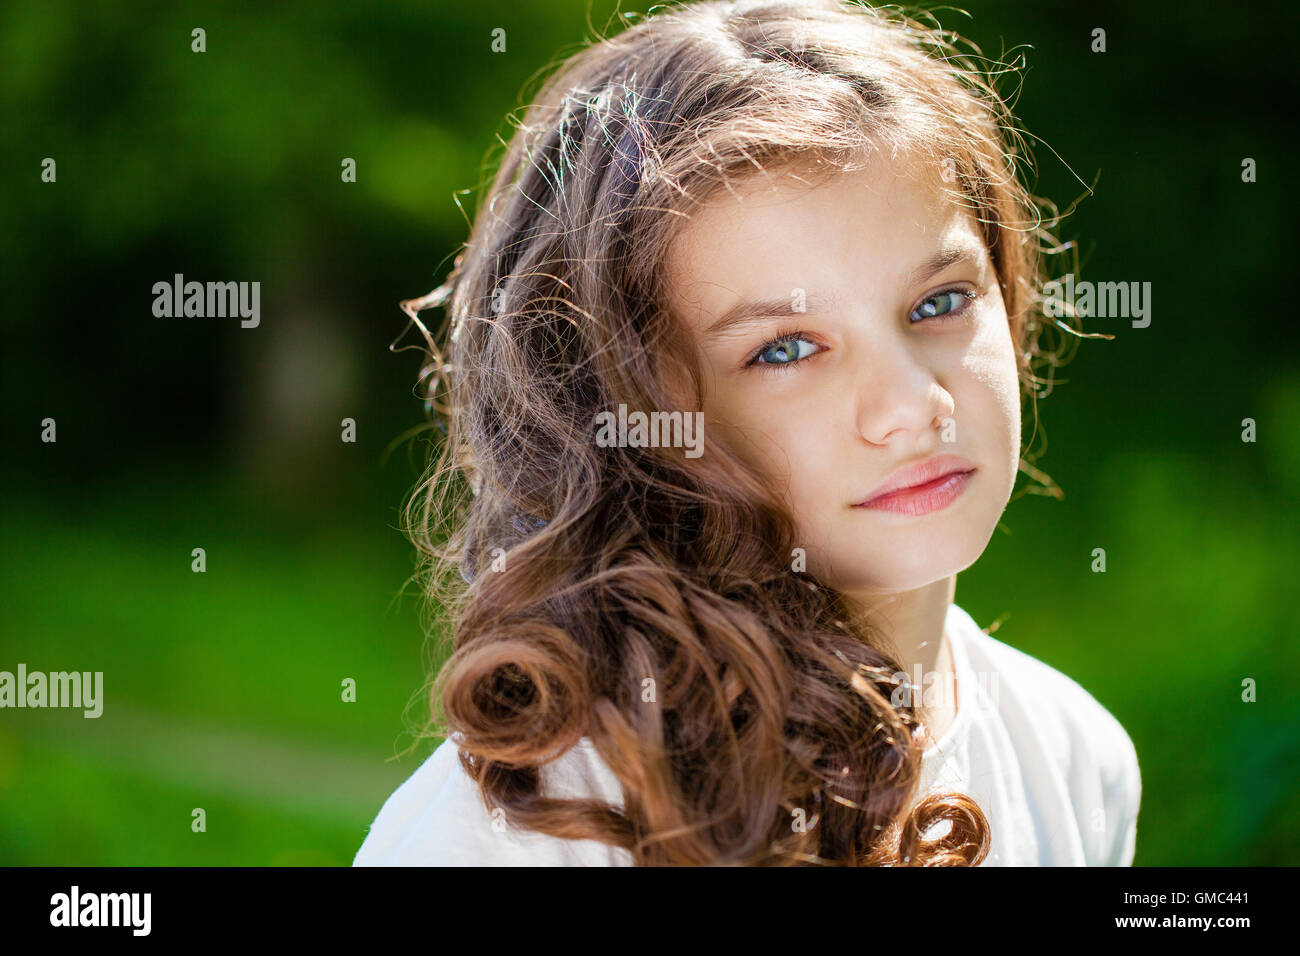 Young Little Russian Girl